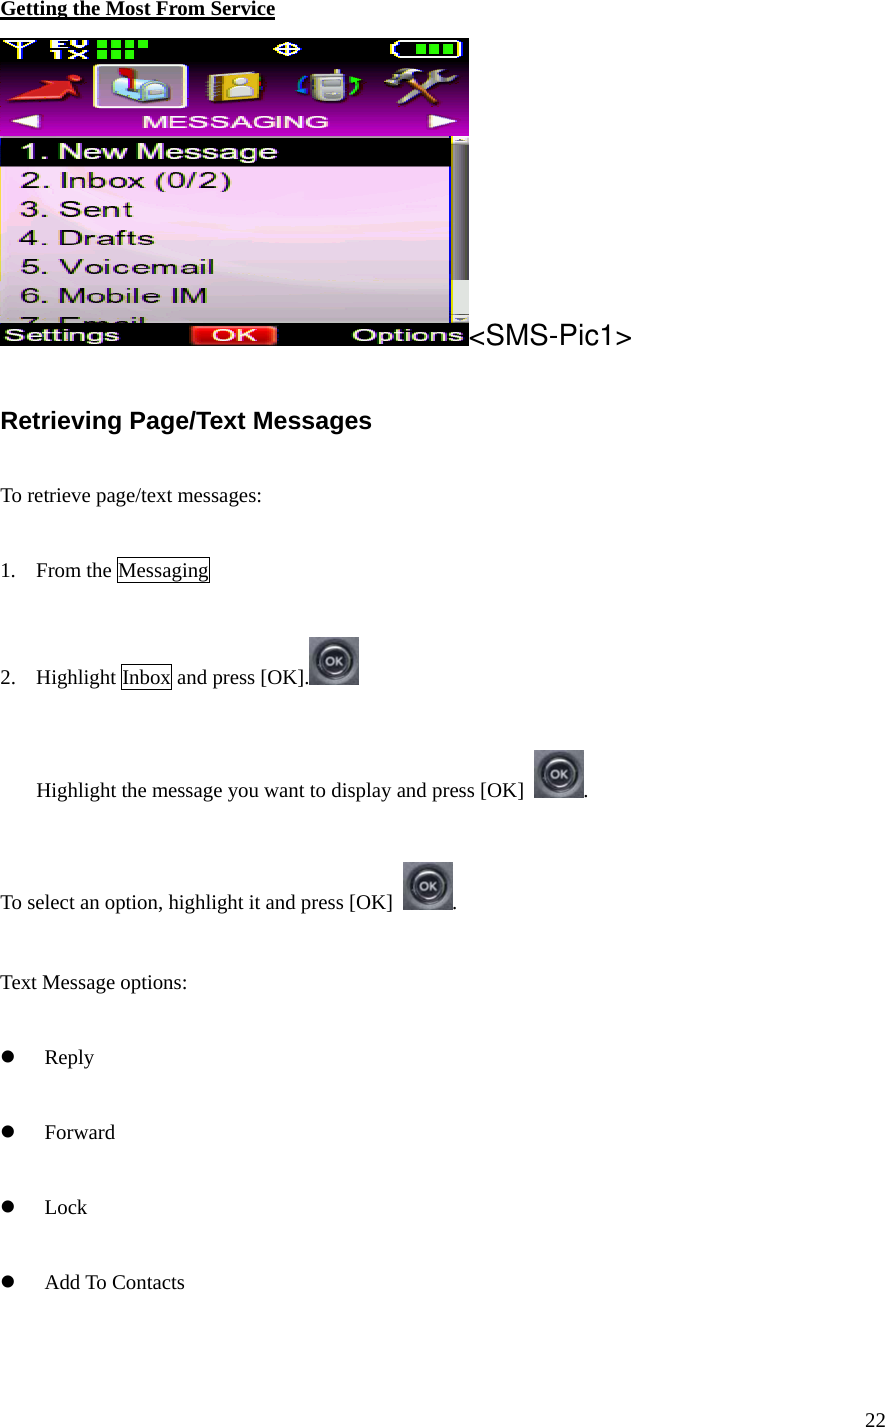 Getting the Most From Service &lt;SMS-Pic1&gt;  Retrieving Page/Text Messages  To retrieve page/text messages:  1. From the Messaging   2.  Highlight Inbox and press [OK].   Highlight the message you want to display and press [OK]  .   To select an option, highlight it and press [OK]  .  Text Message options:    Reply    Forward    Lock     Add To Contacts  22 